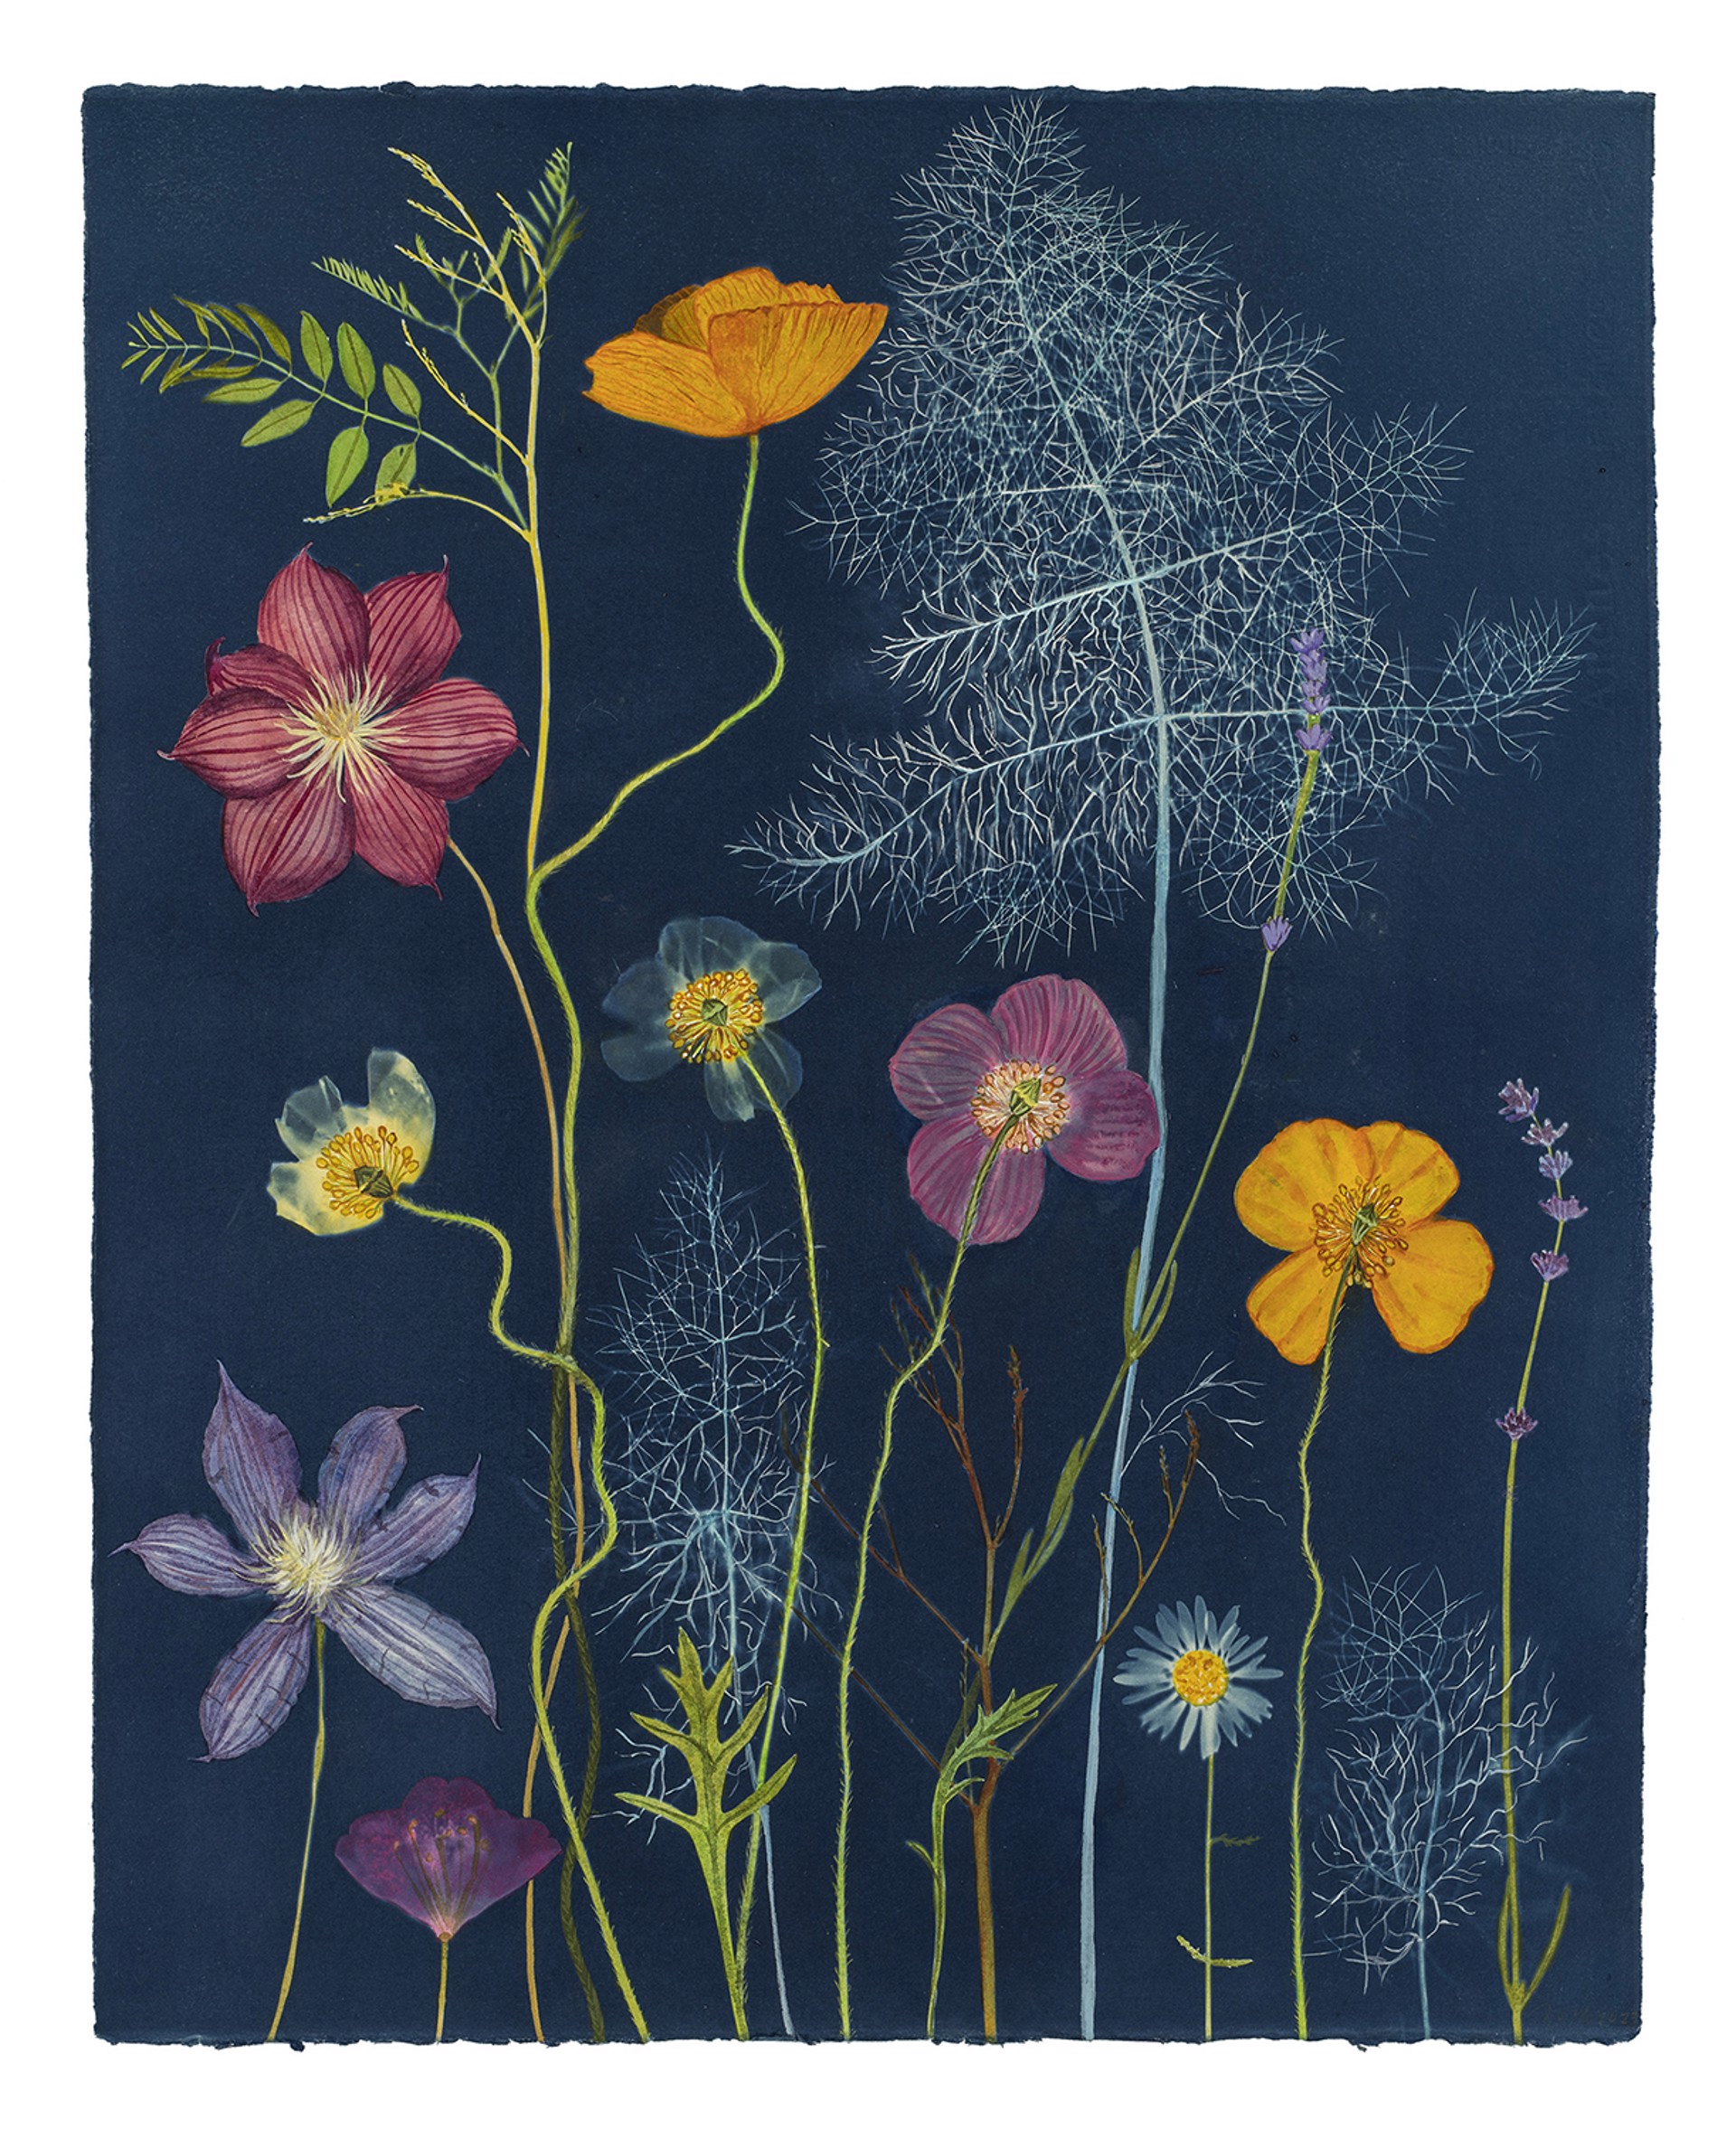 Nocturnal Nature (Poppies, Clematis, Fennel) by Julia Whitney Barnes